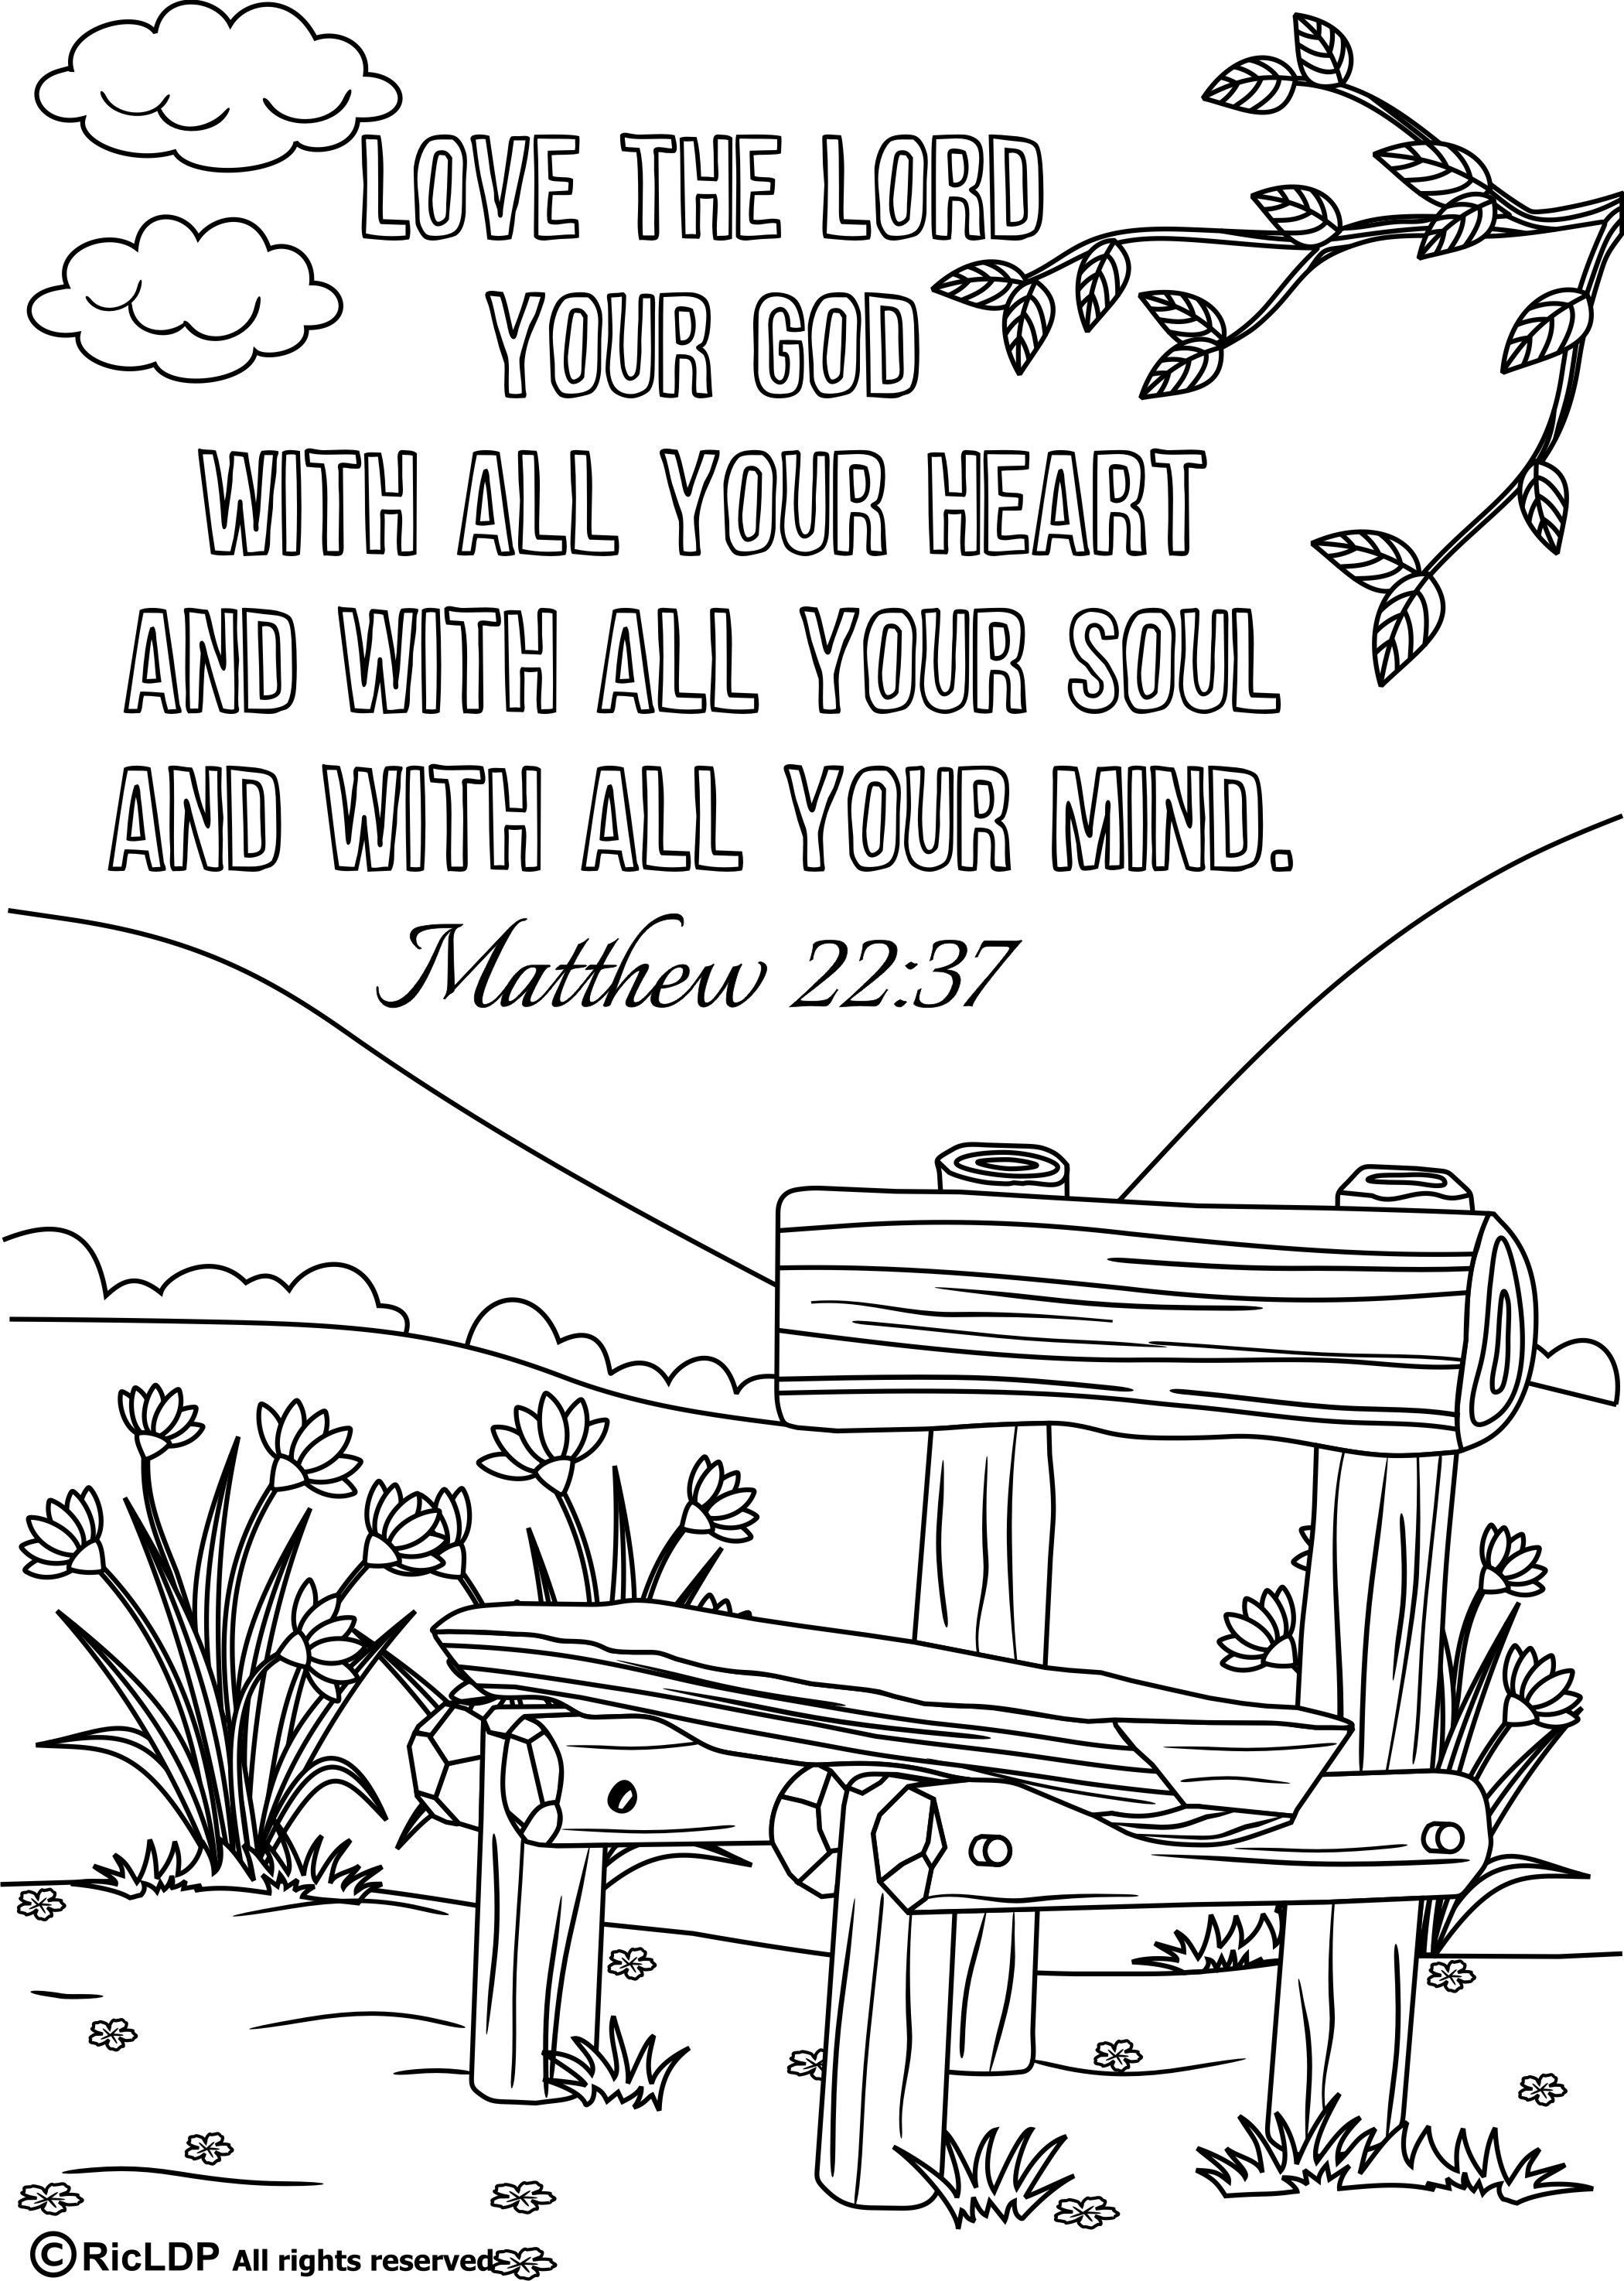 15 Bible Verses Coloring Pages | Christian Coloring Pages-Nt | Bible - Free Printable Bible Coloring Pages With Verses